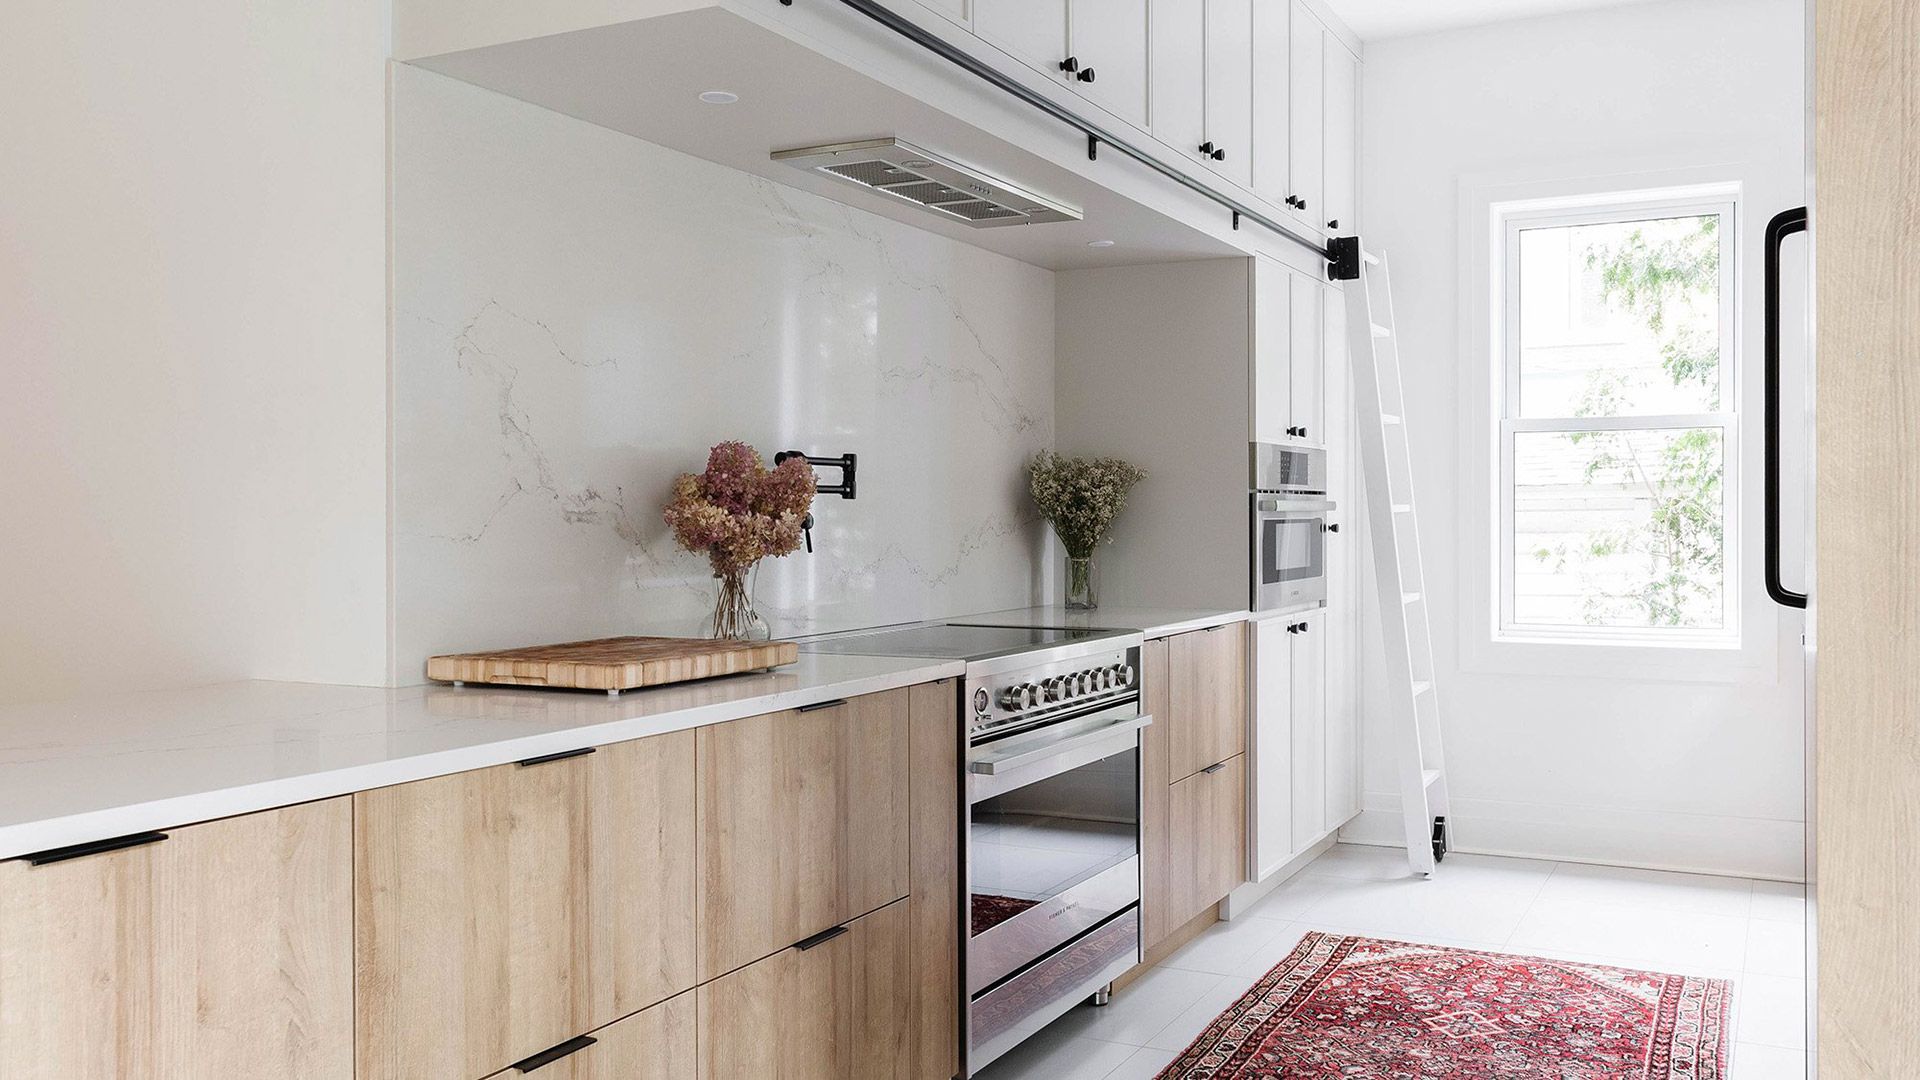 How to choose your kitchen's new range hood